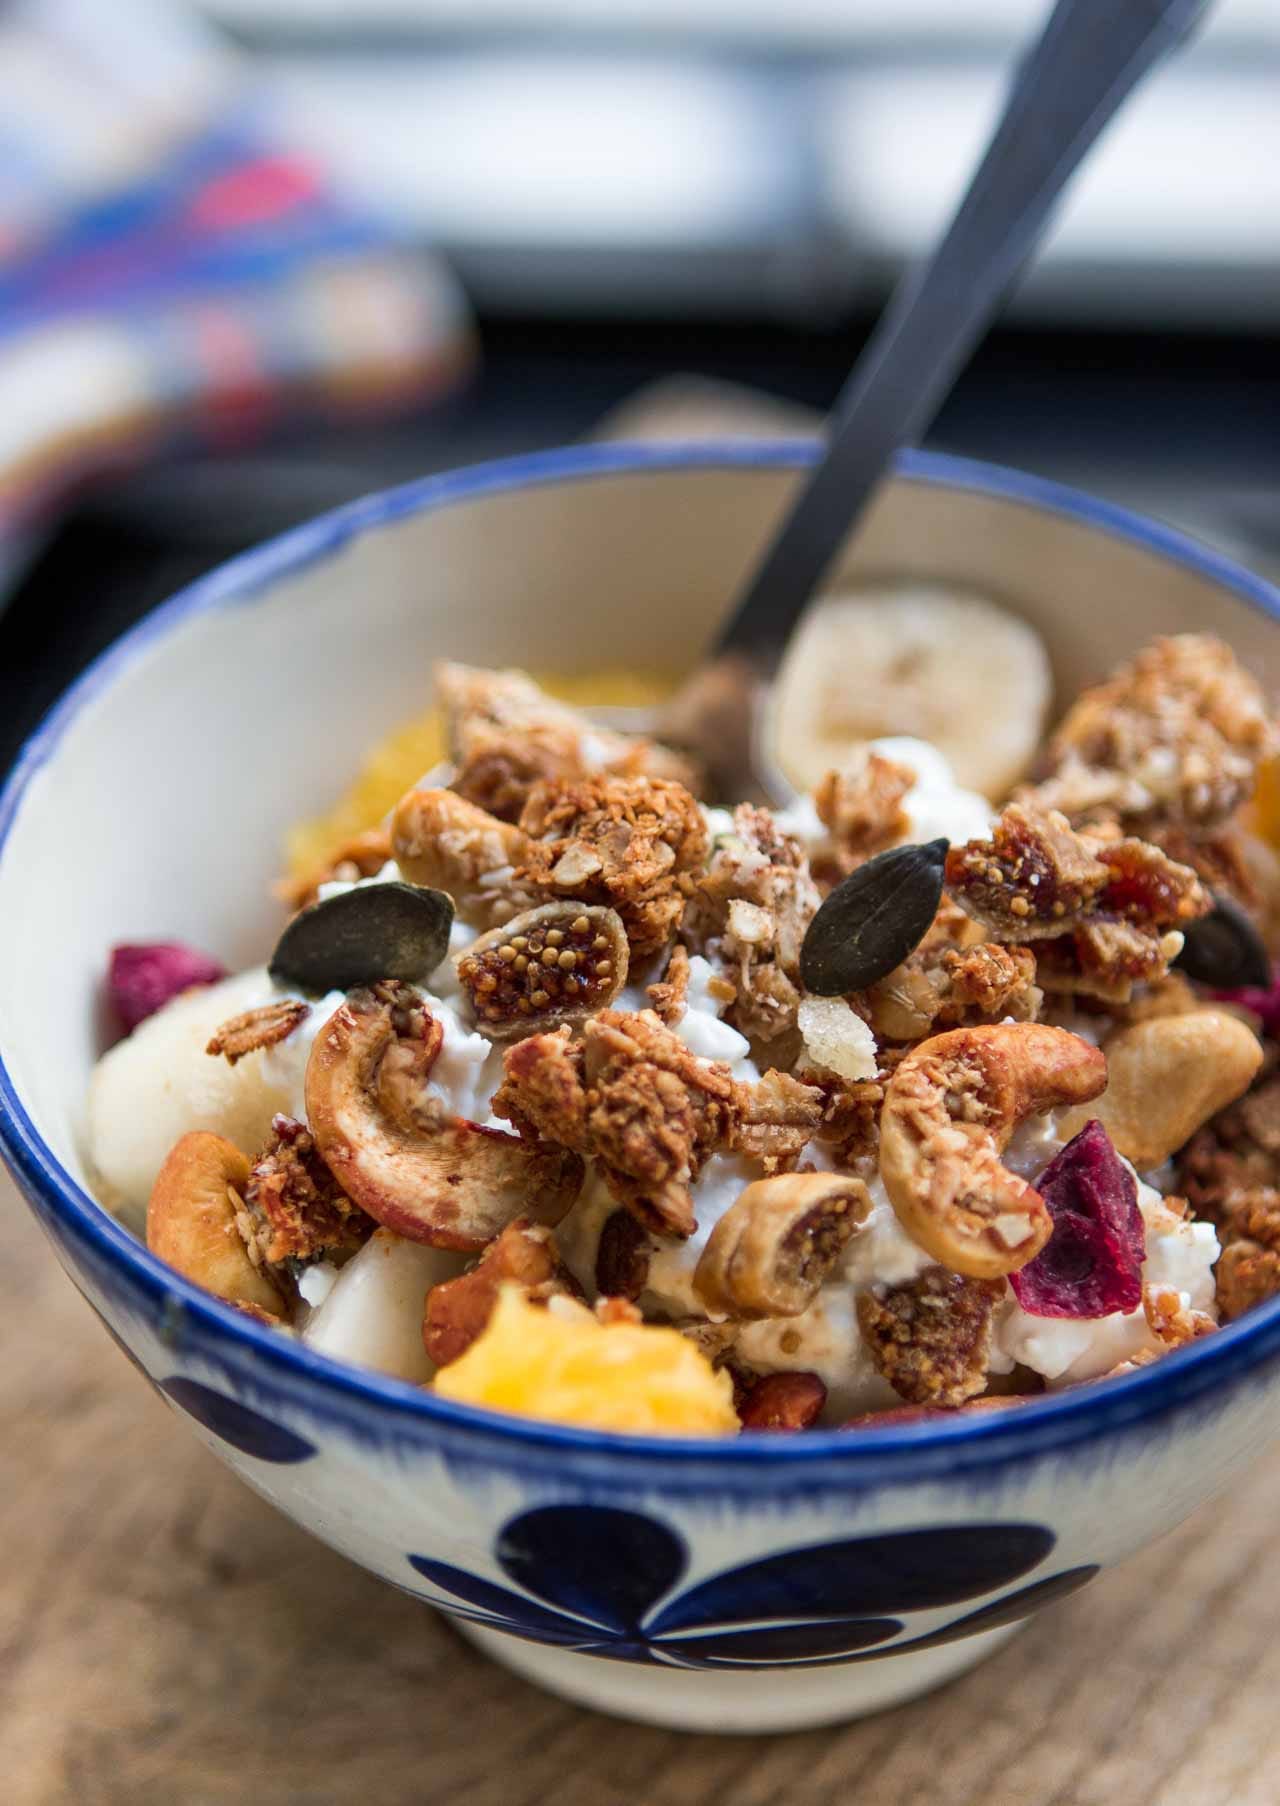 Bowl of cereal with spoon put on wood table near granola in glass